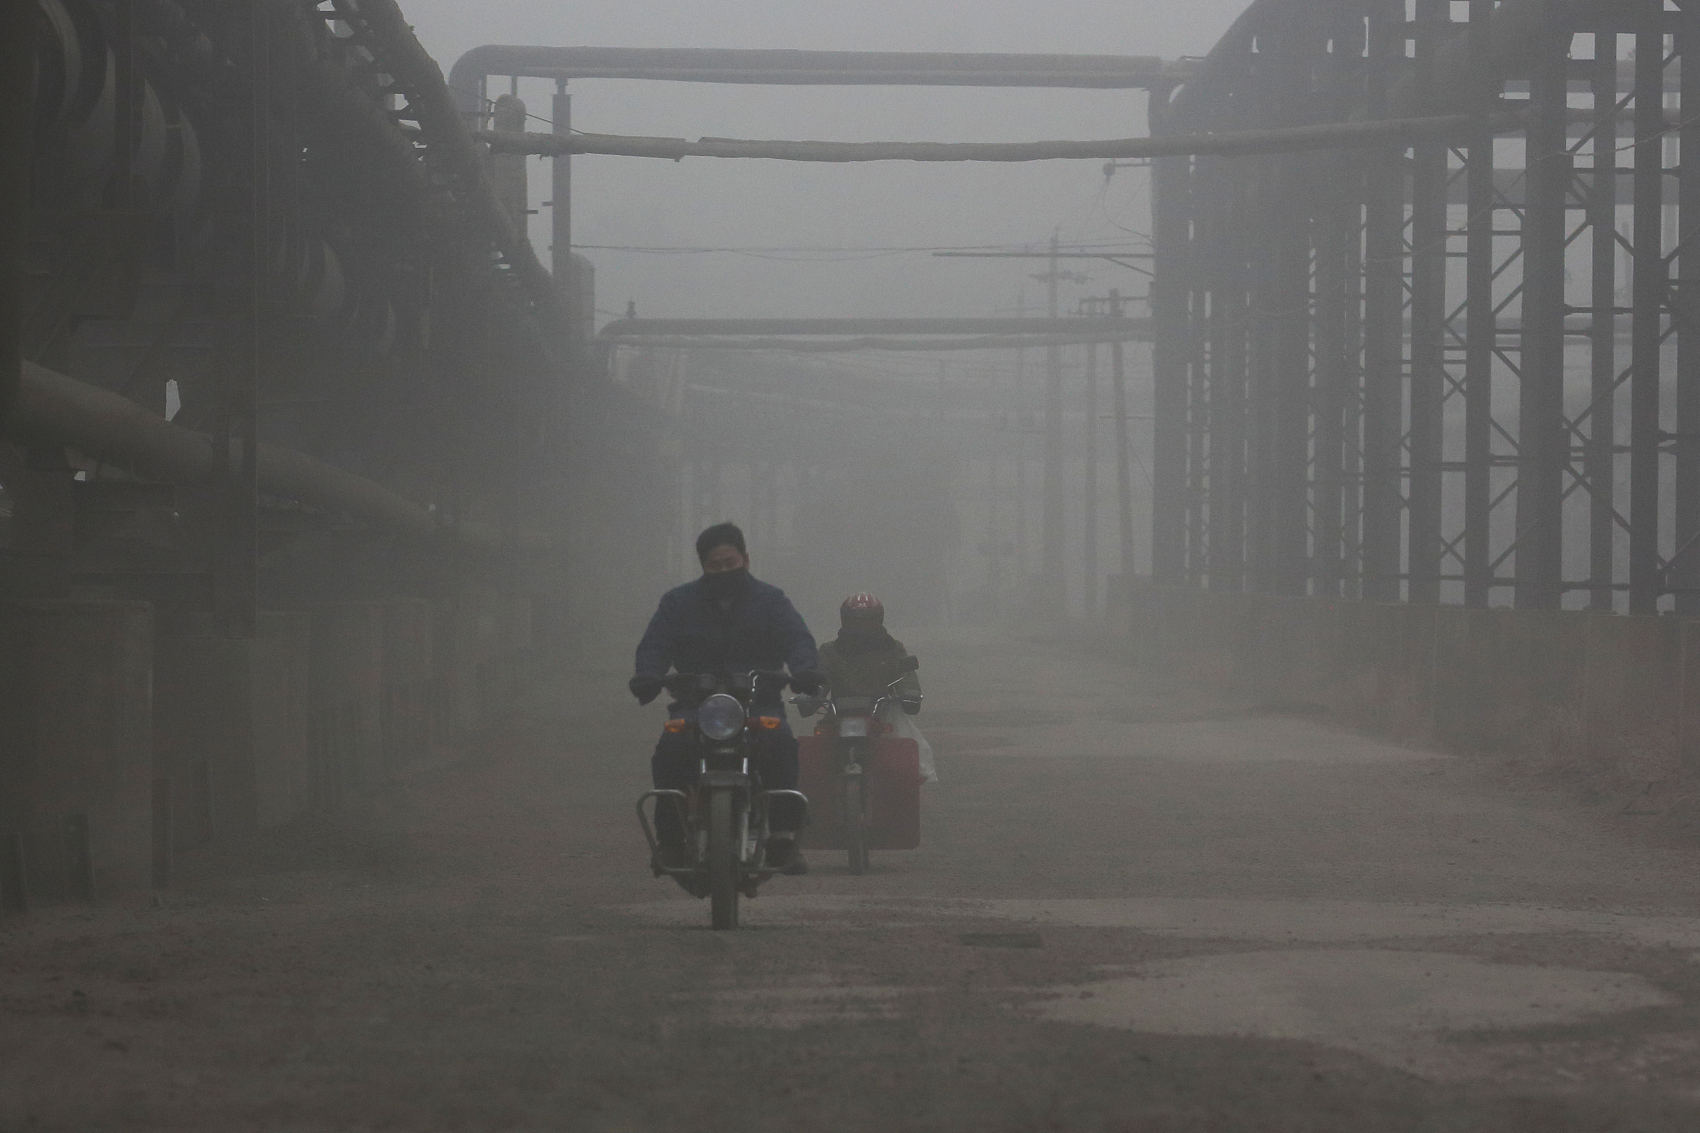 Tianjin closes over 9,000 polluting companies